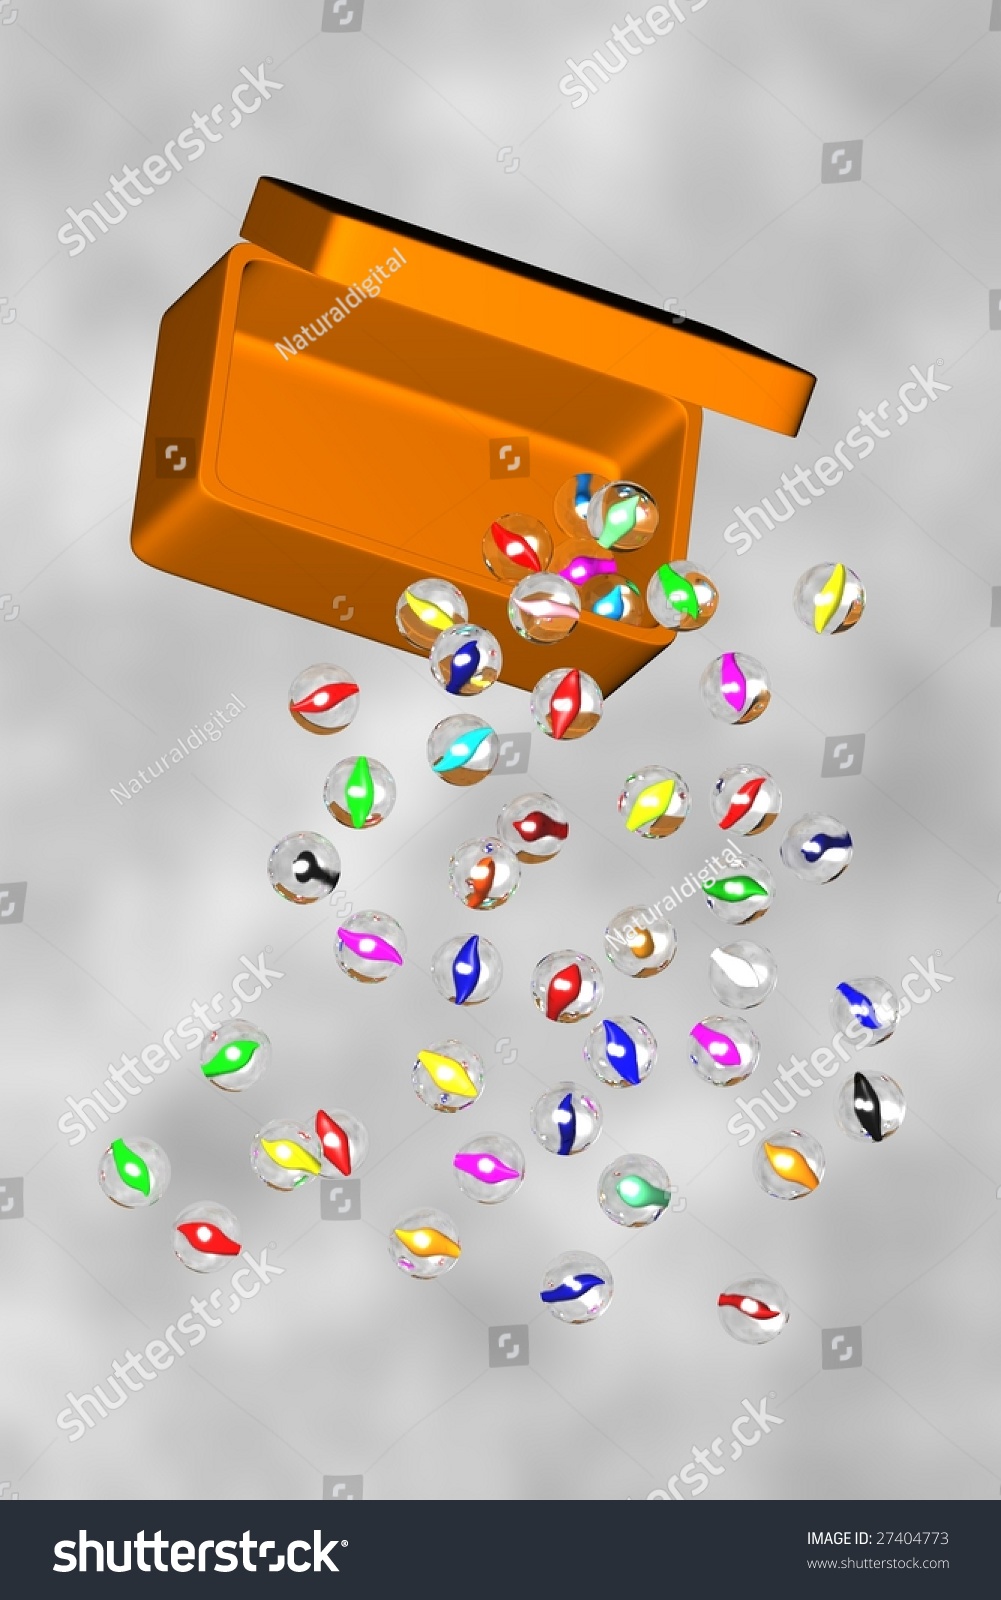 An illustration of marbles tumbling from a box in mid air #27404773